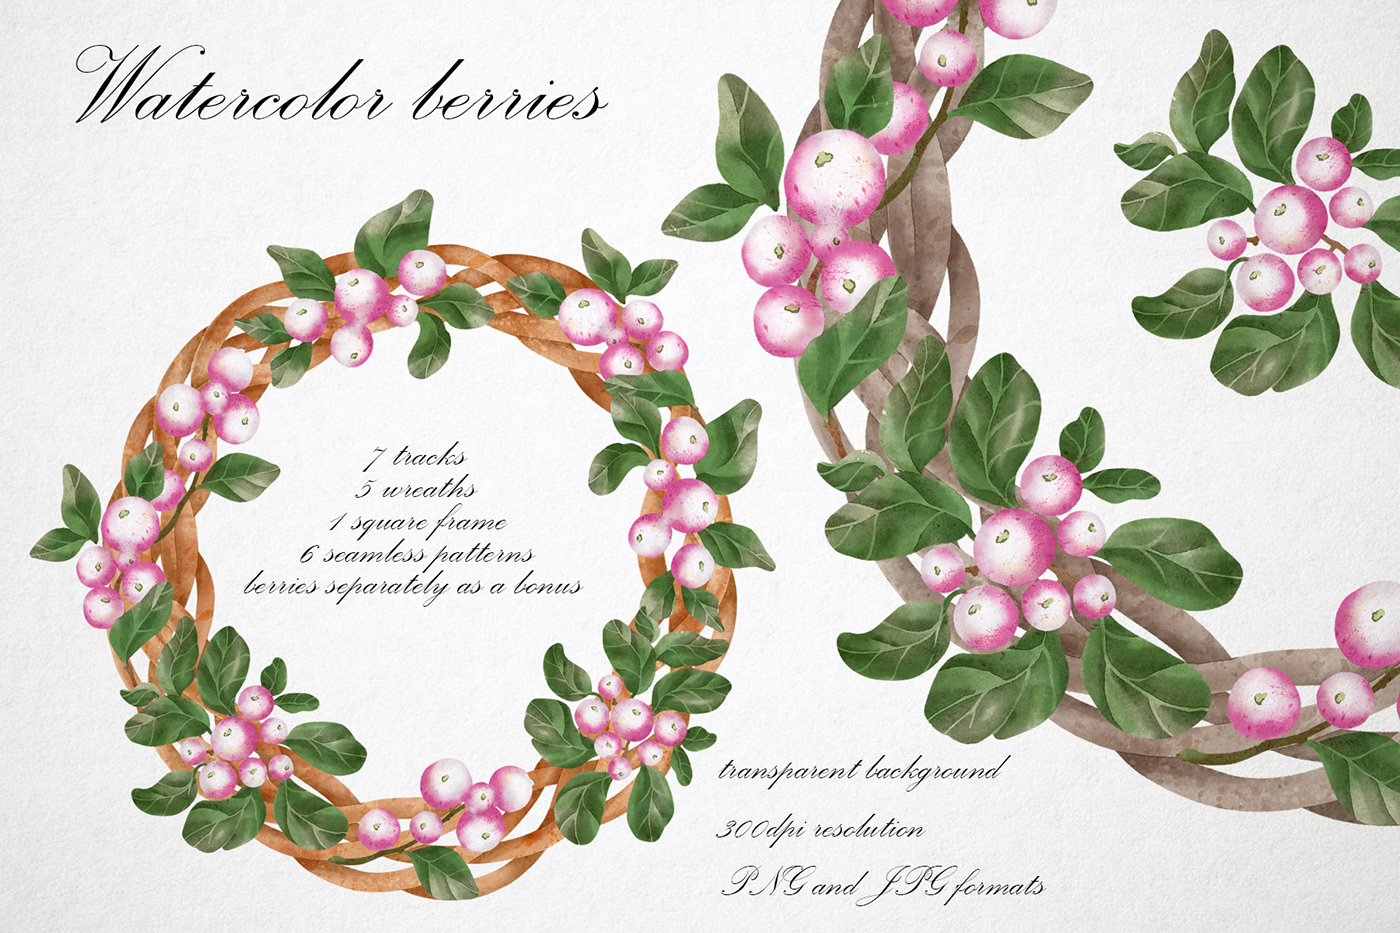 berries Christmas composition floral flower pattern print watercolor winter wreath